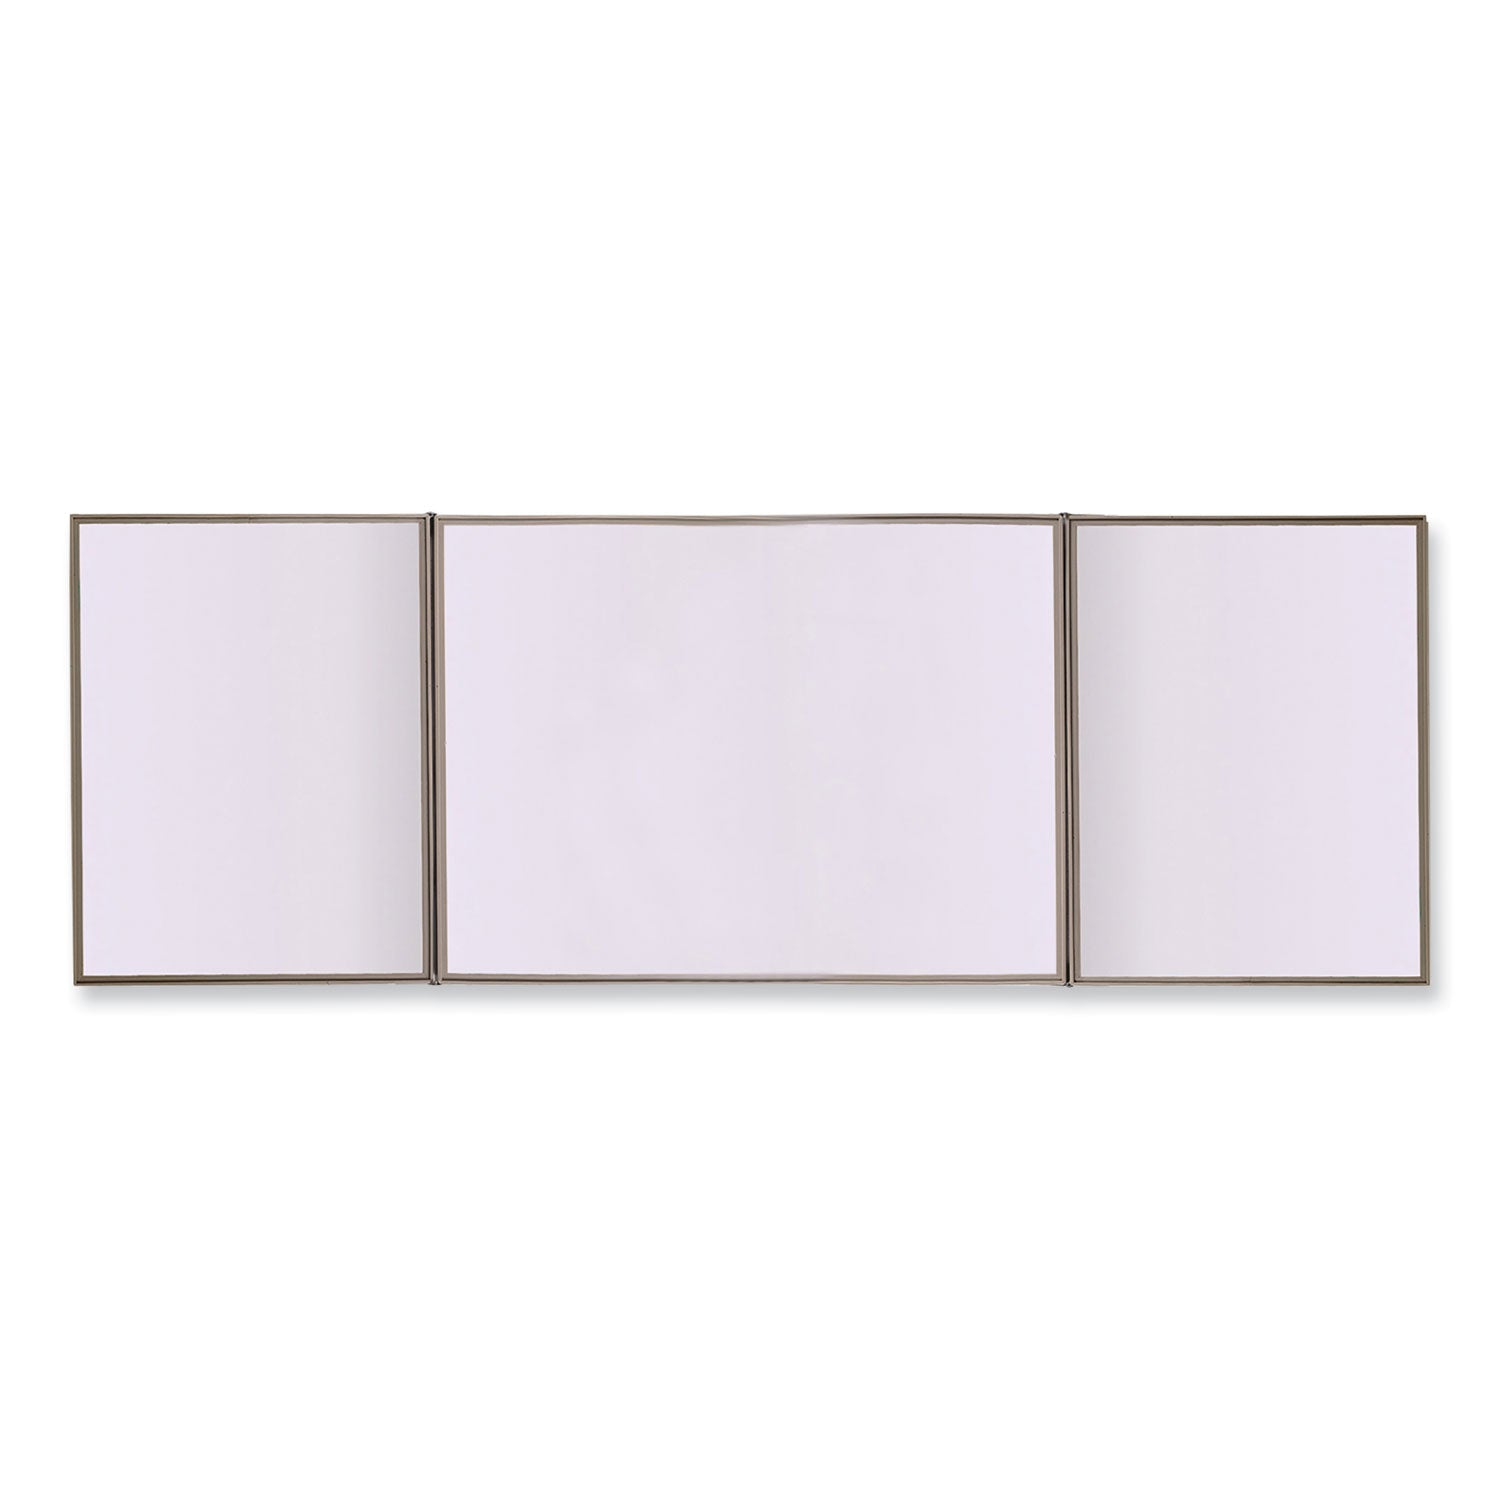 visuall-pc-whiteboard-cabinet-gray-fabric-bulletin-board-exterior-doors-36x24-aluminum-frame-ships-in-7-10-business-days_ghe41302 - 3